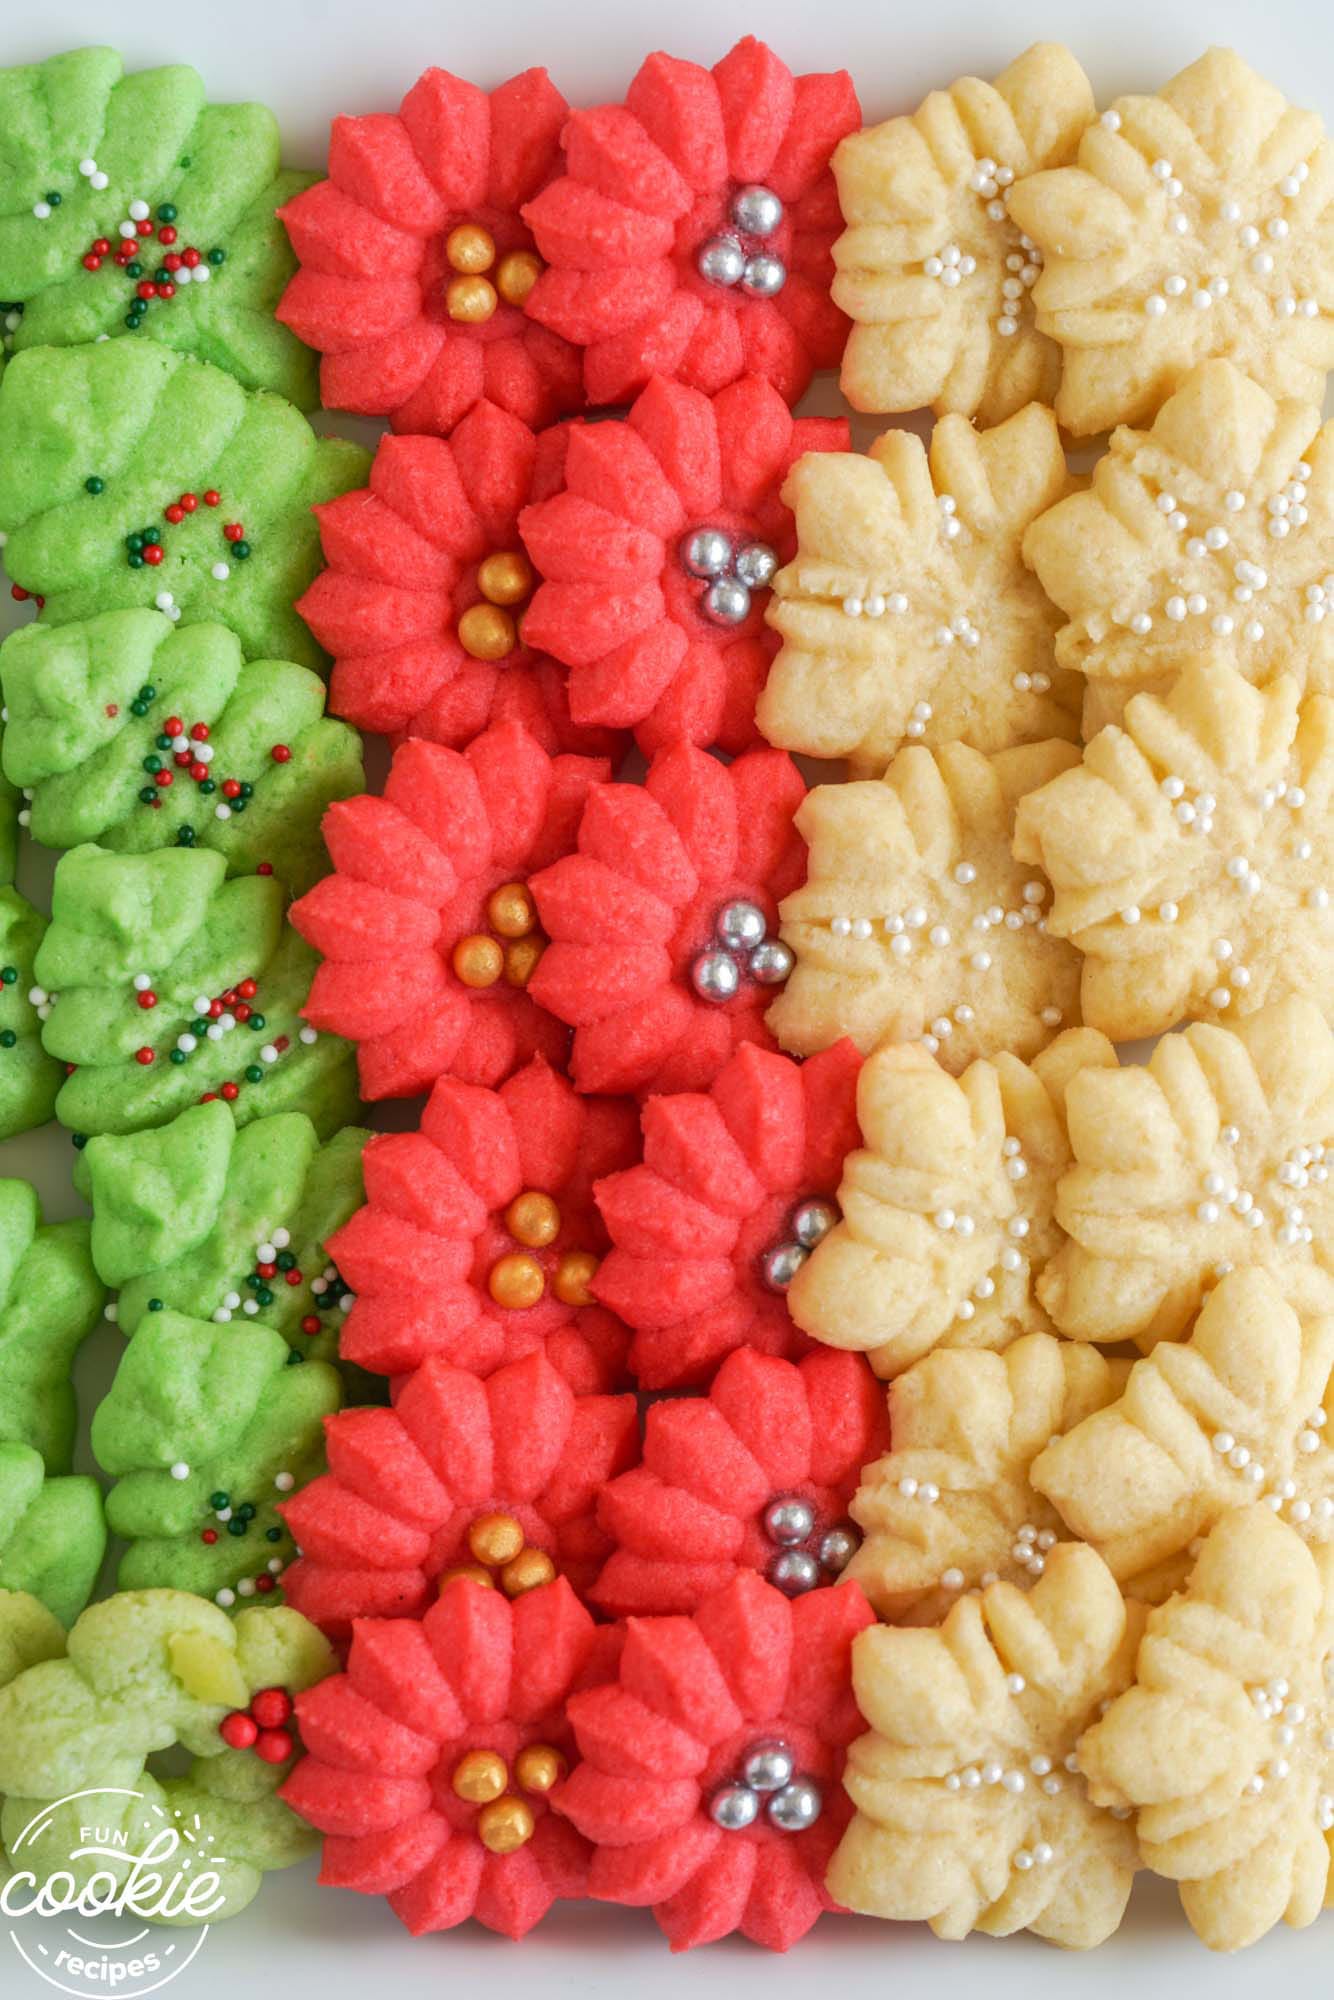 Rows of colorful spritz christmas cookies on a plate - an overhead shot.